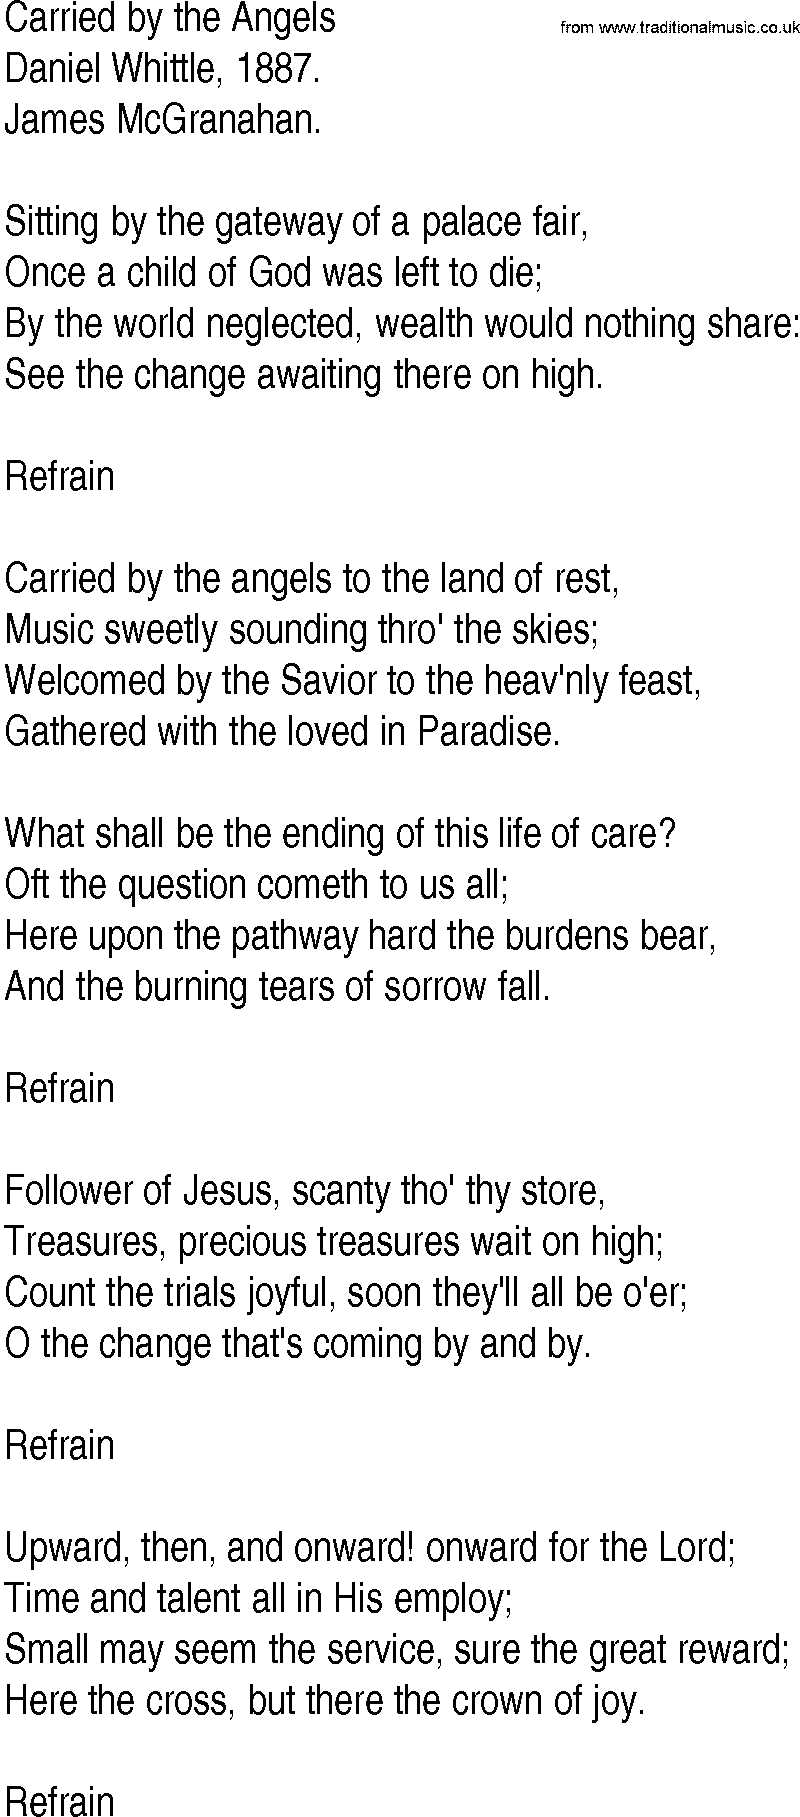 Hymn and Gospel Song: Carried by the Angels by Daniel Whittle lyrics